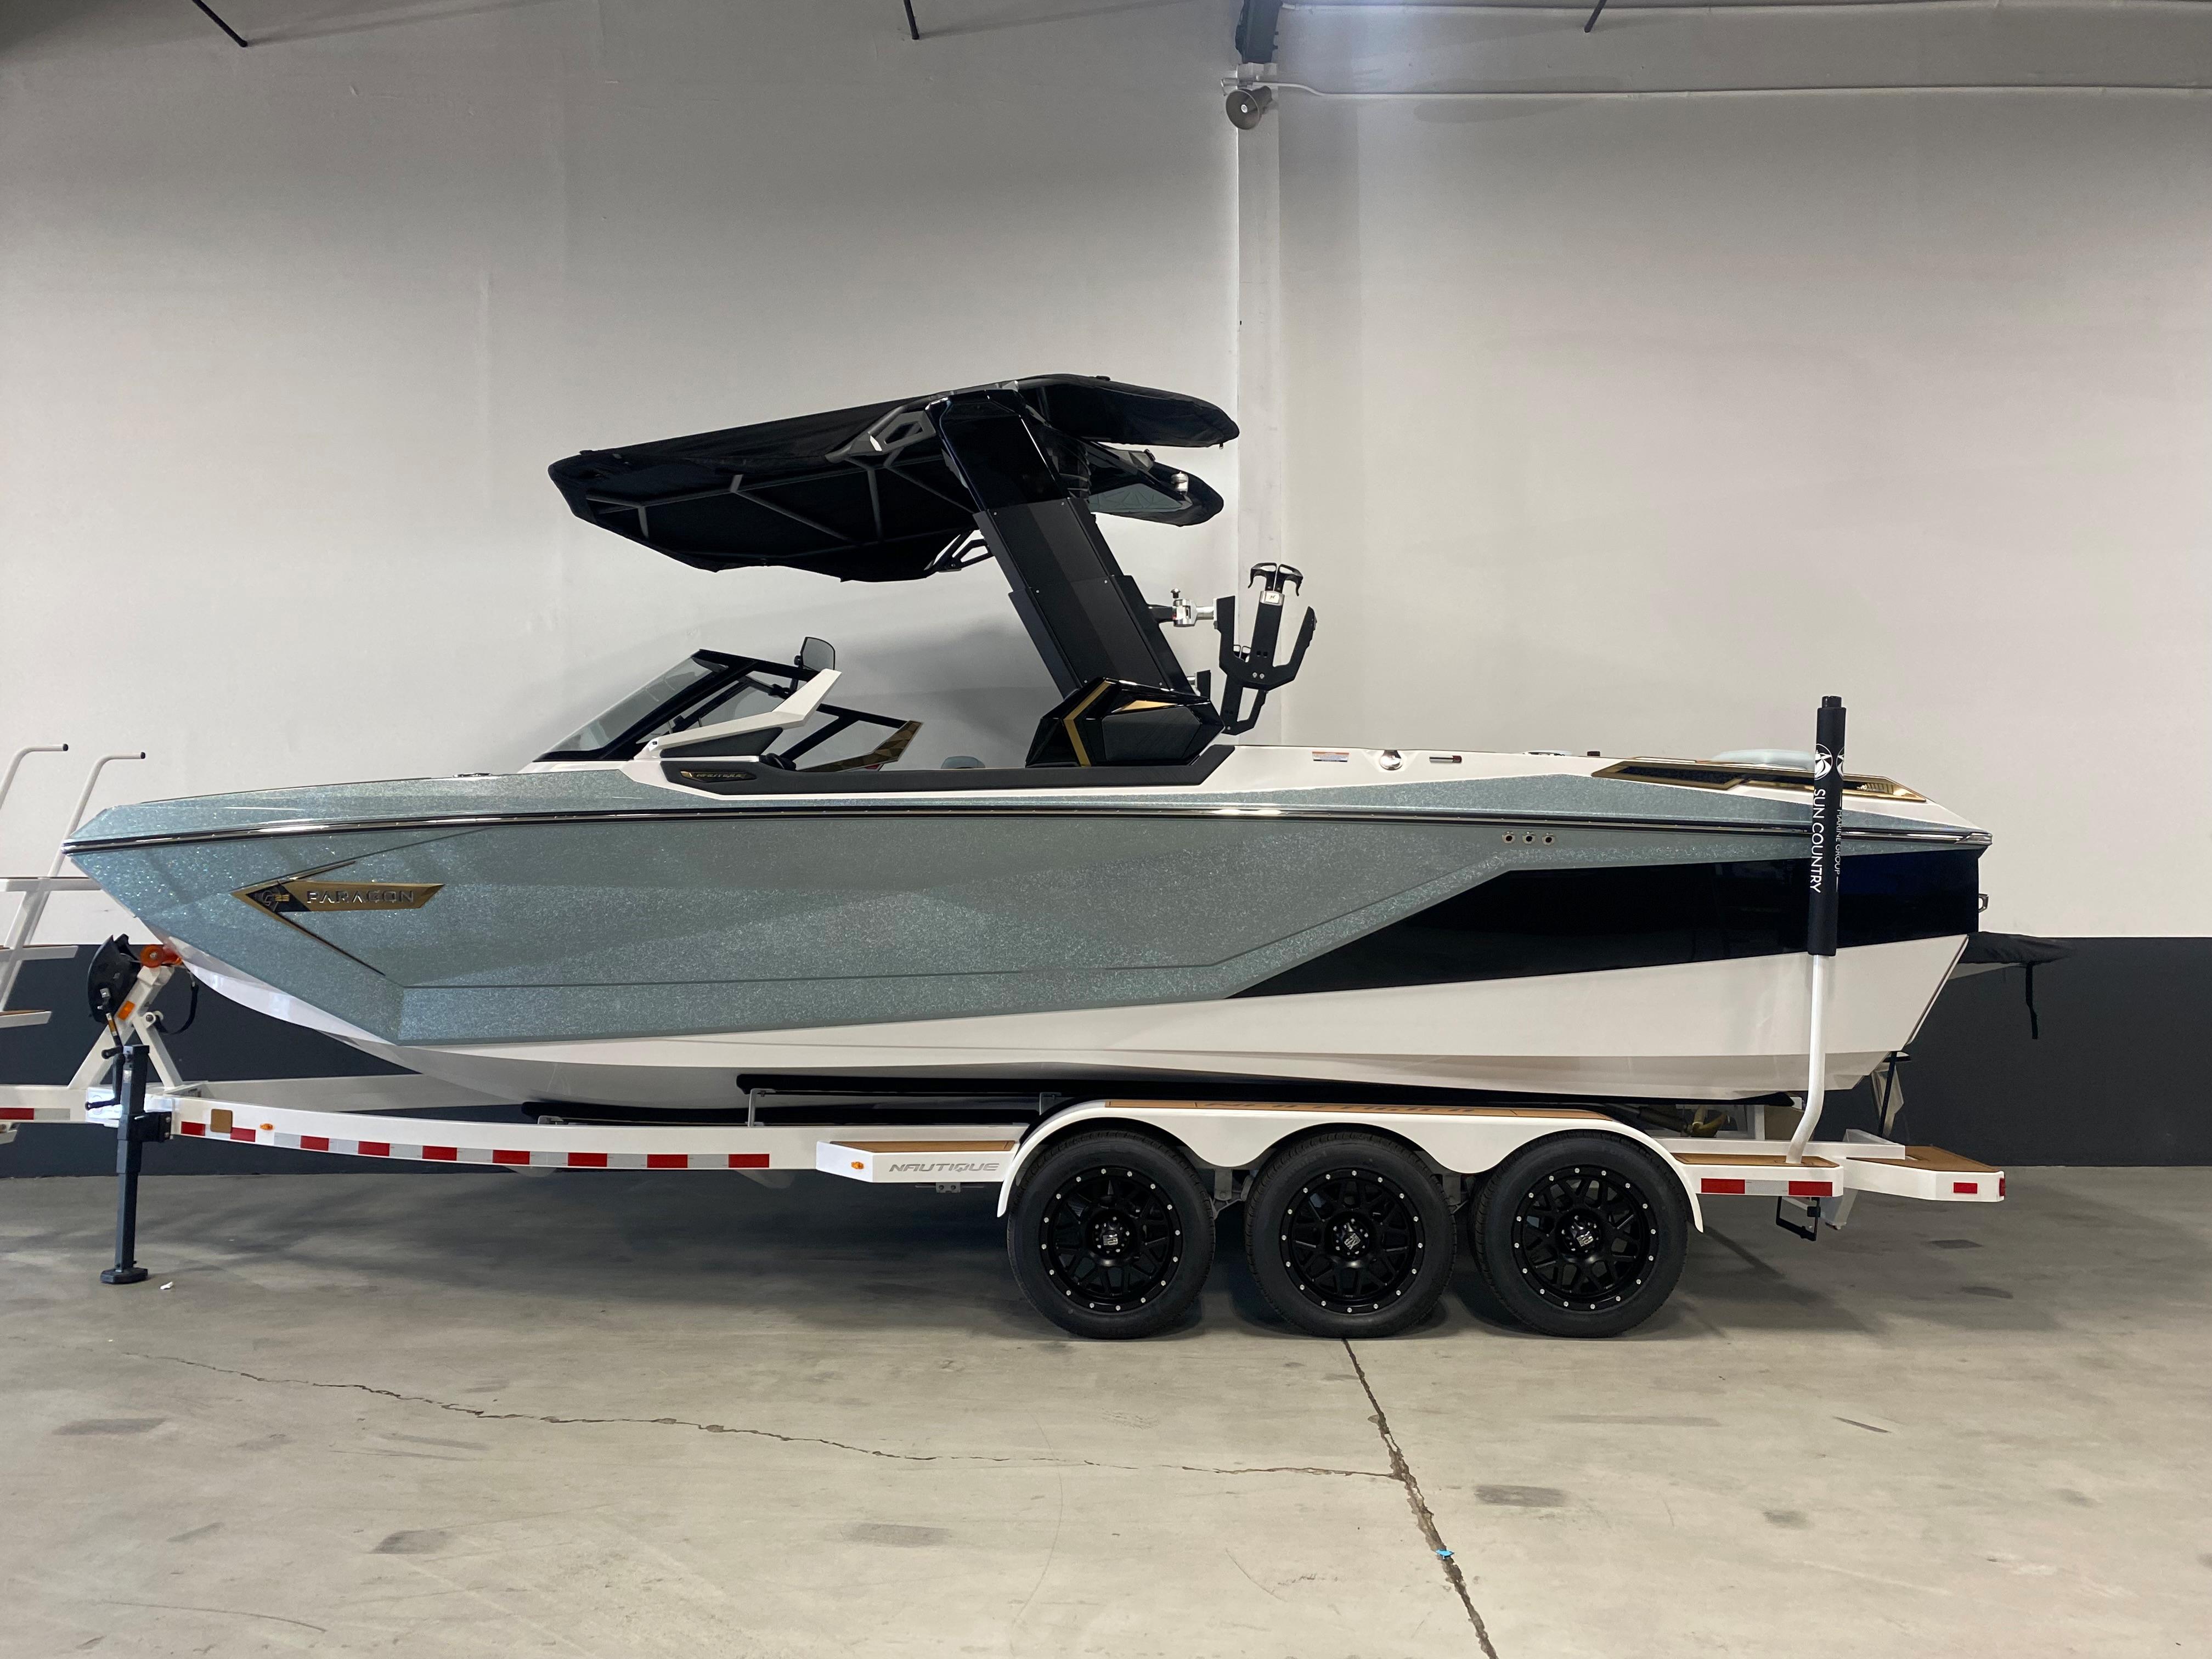 Runabout boats for sale in California pic image